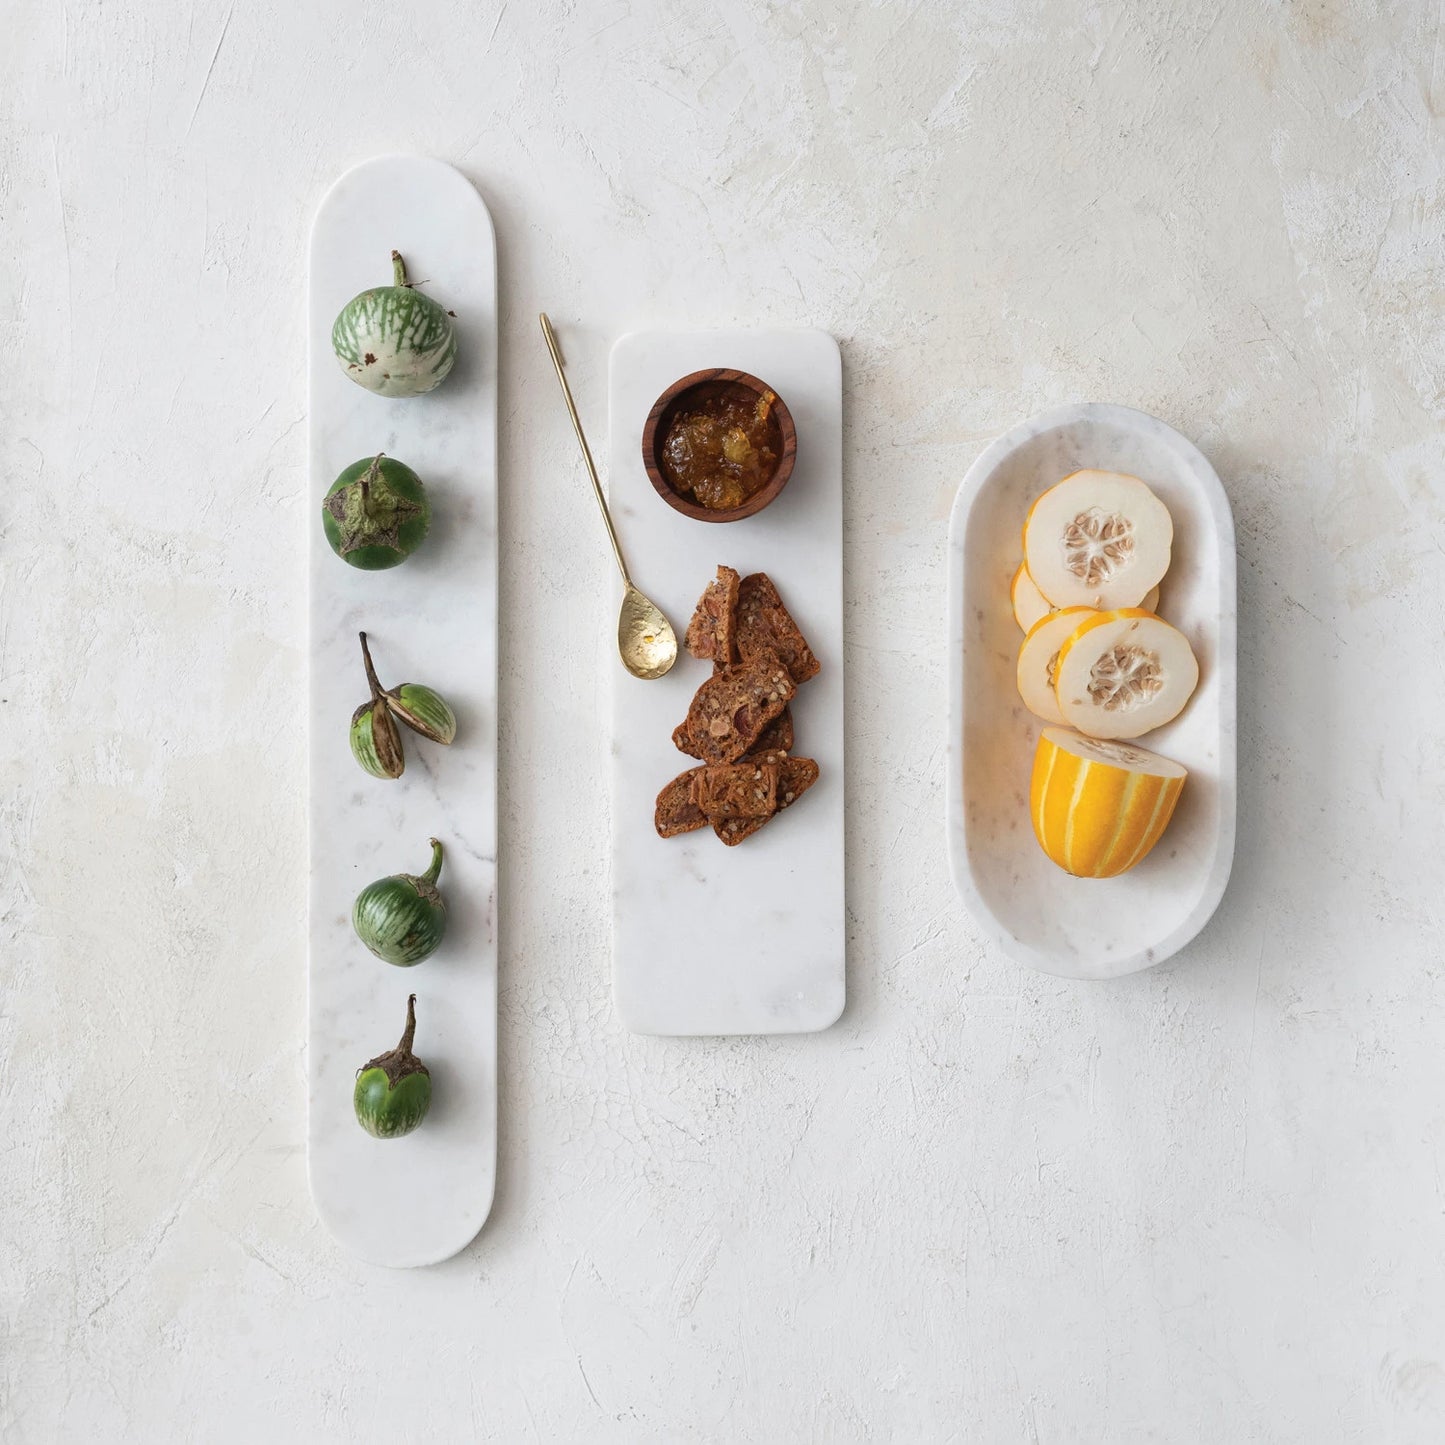 Marble Serving Board with Acacia Wood Bowl